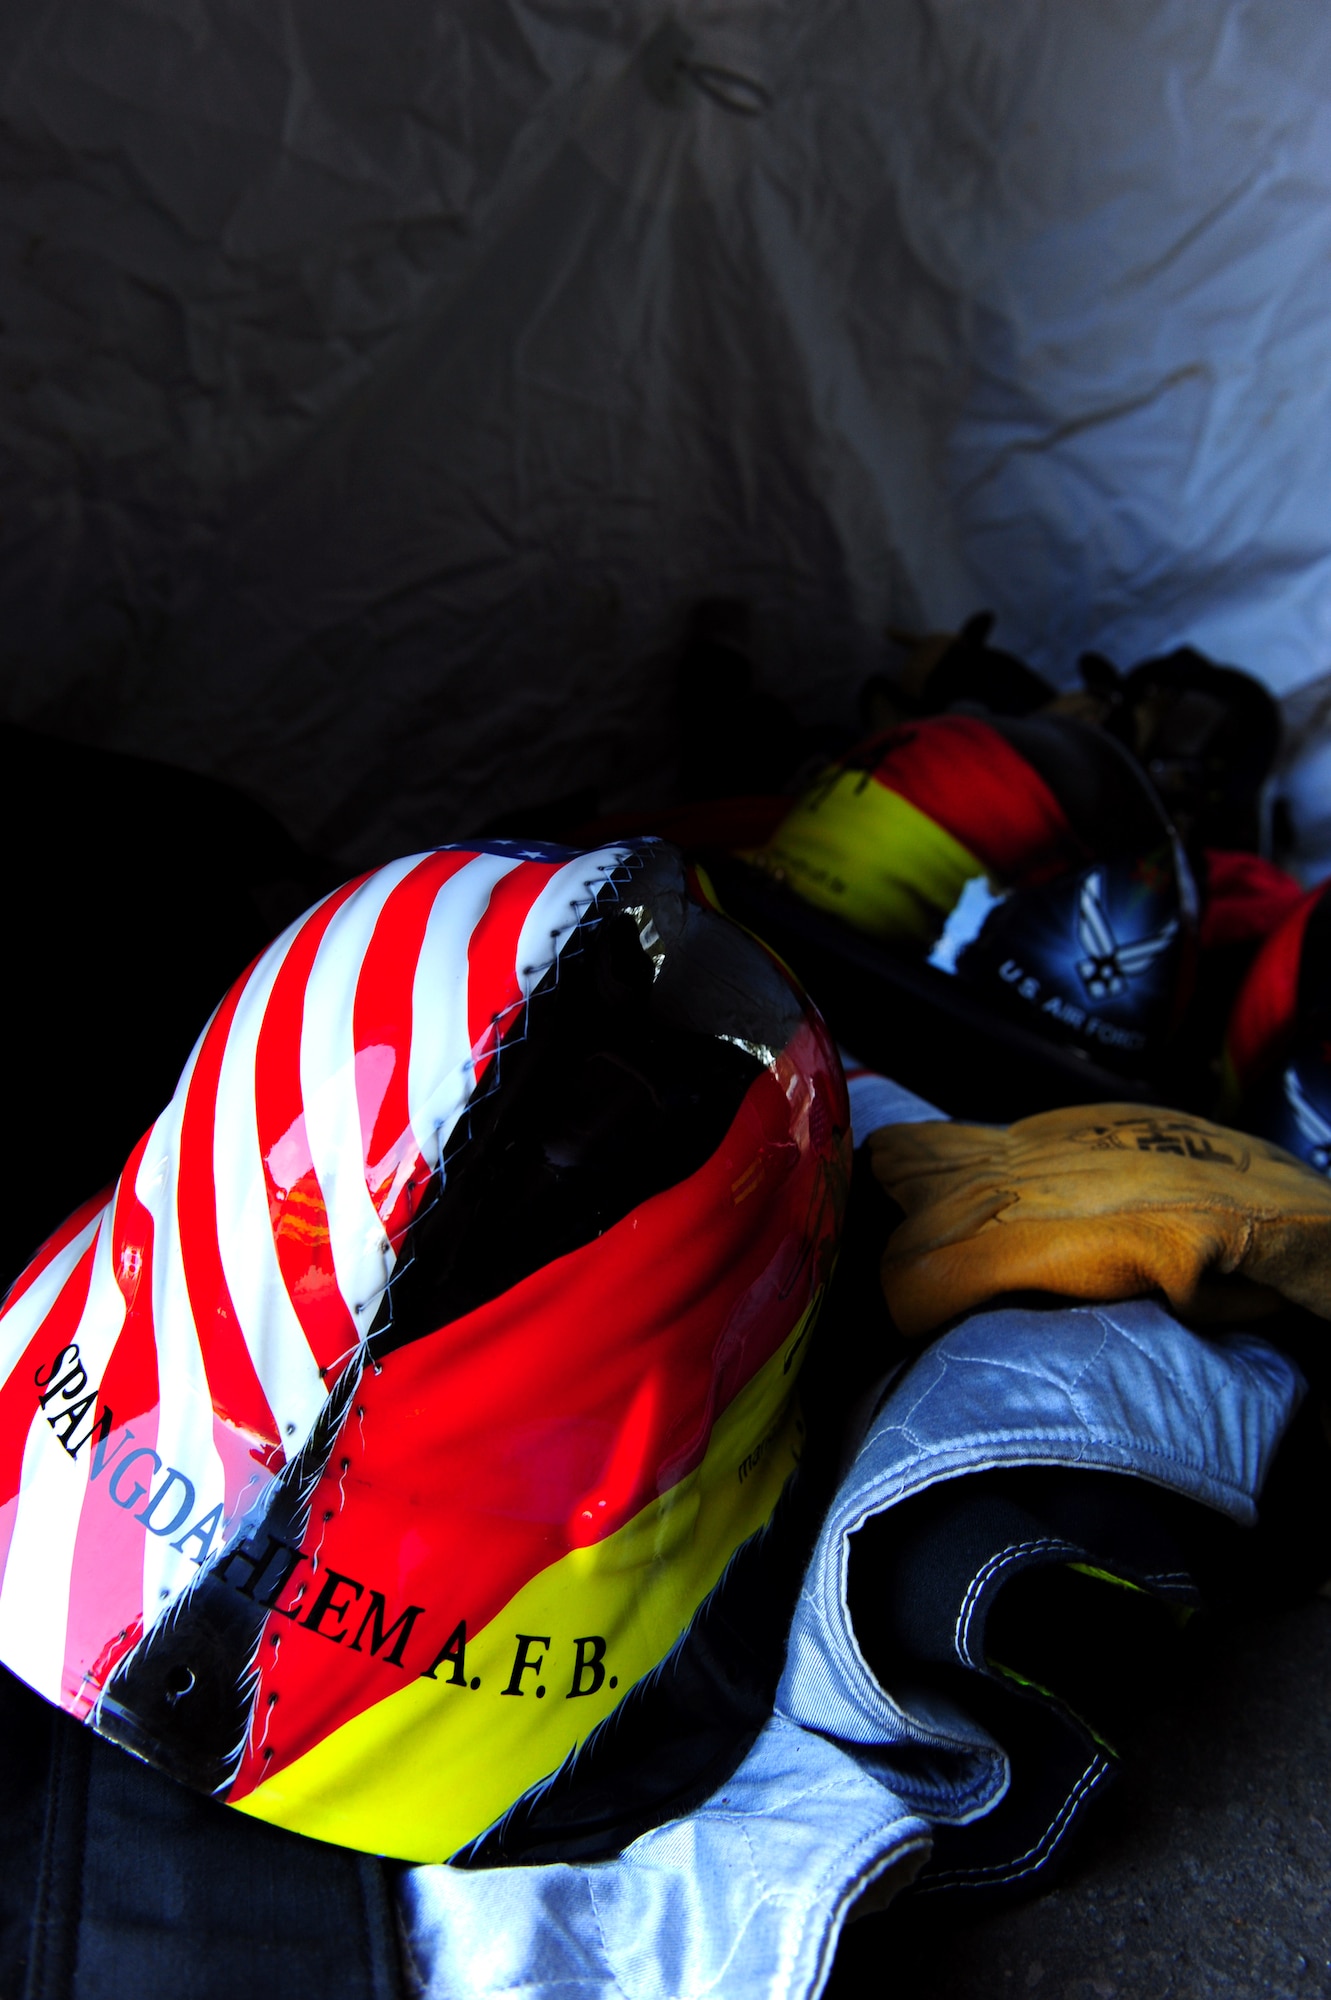 U.S. Air Forces in Europe firefighter helmets lay in a tent during a Firefighter Combat Challenge at the 435th Construction and Training Squadron contingency training site, Ramstein Air Base, Germany, Oct. 9, 2010. The competition consisted of a timed, five part obstacle course simulating real life challenges. (U.S. Air Force photo by Airman 1st Class Brea Miller)